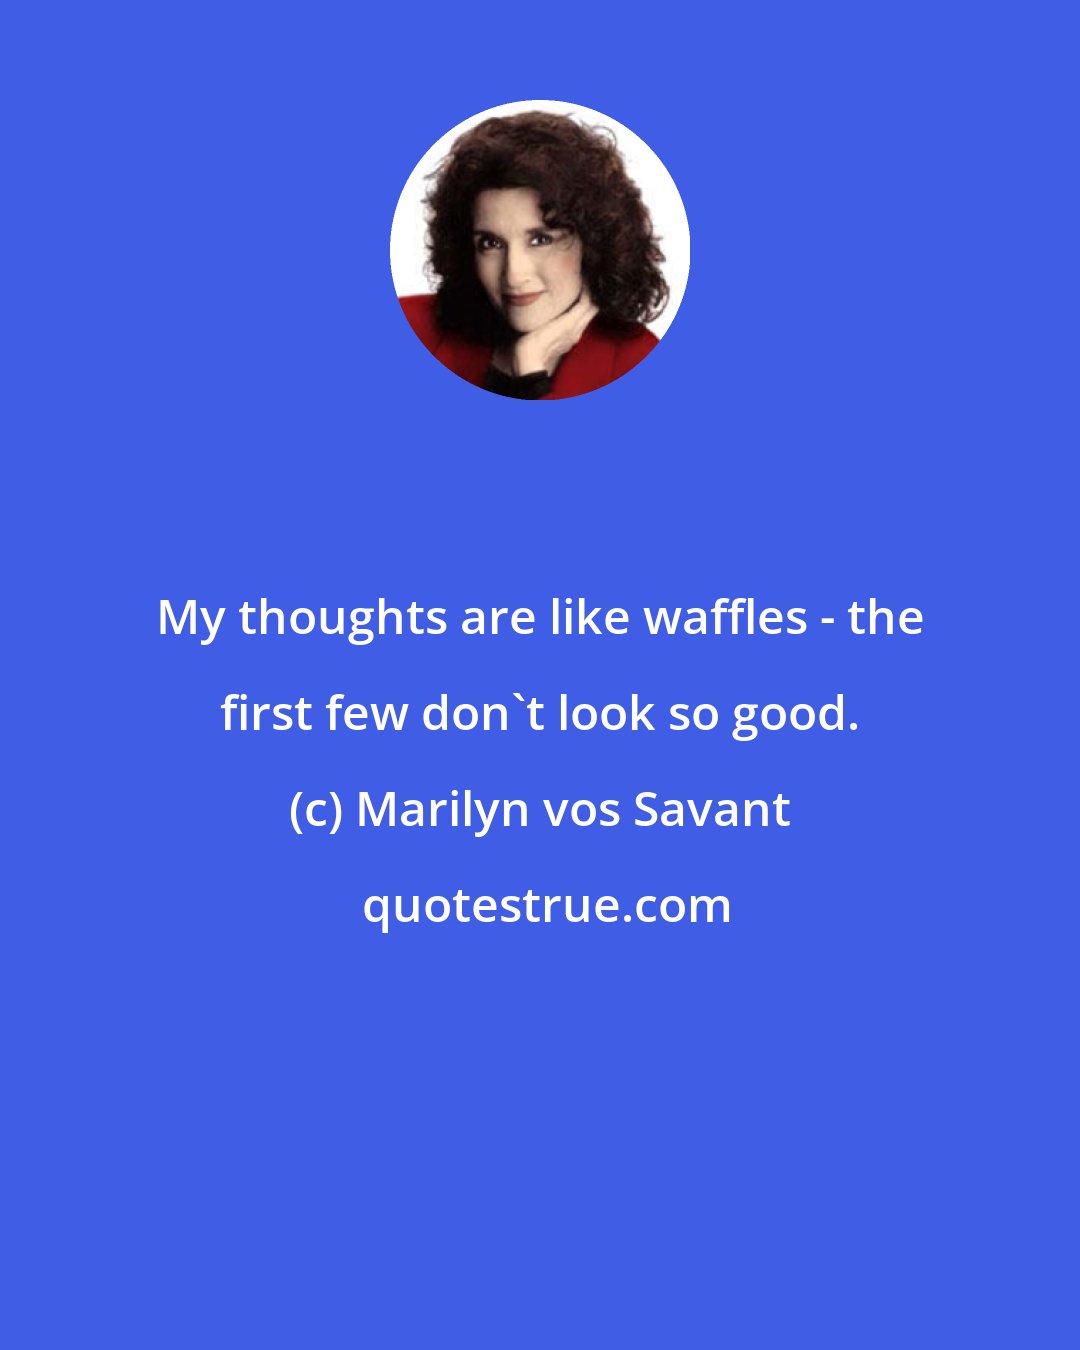 Marilyn vos Savant: My thoughts are like waffles - the first few don't look so good.